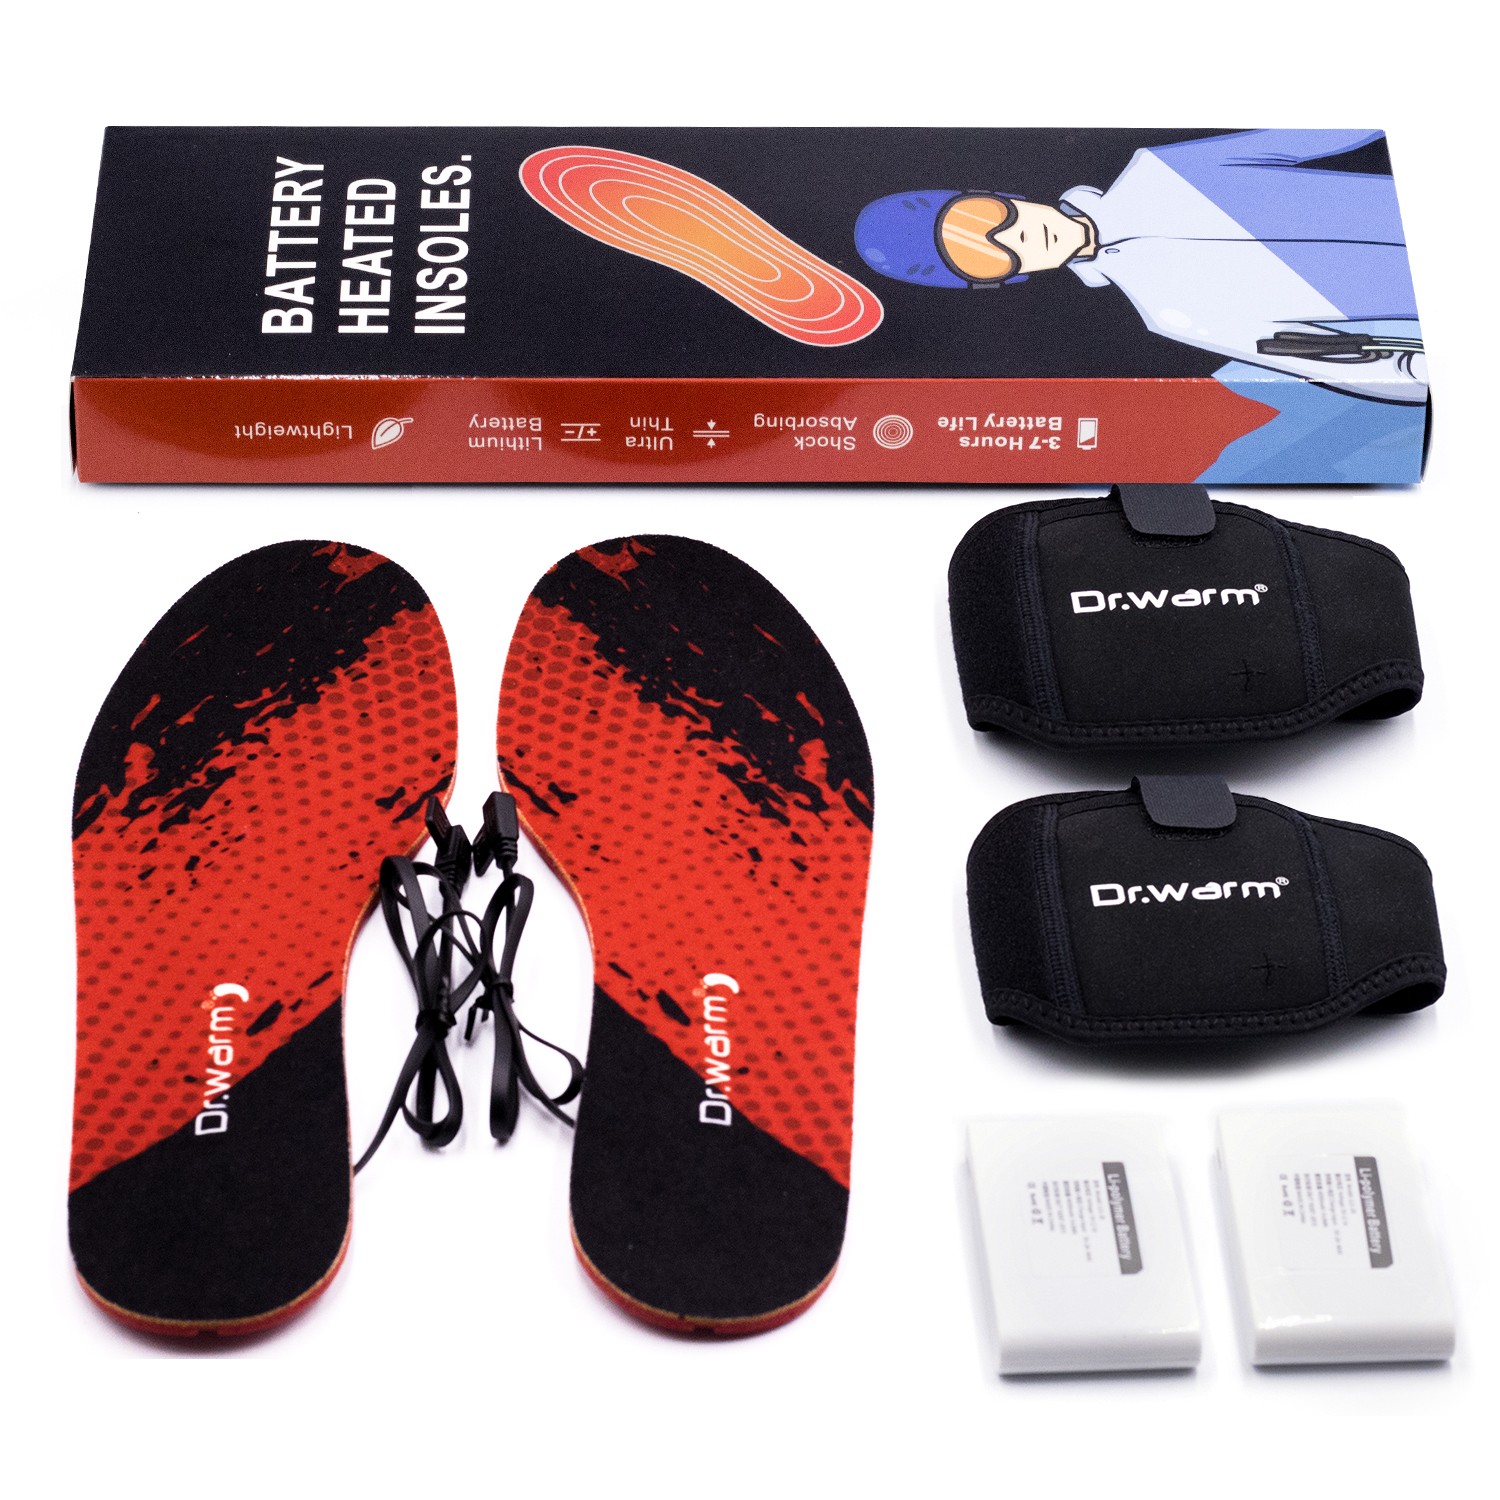 Dr. Warm bluetooth heated insoles-20